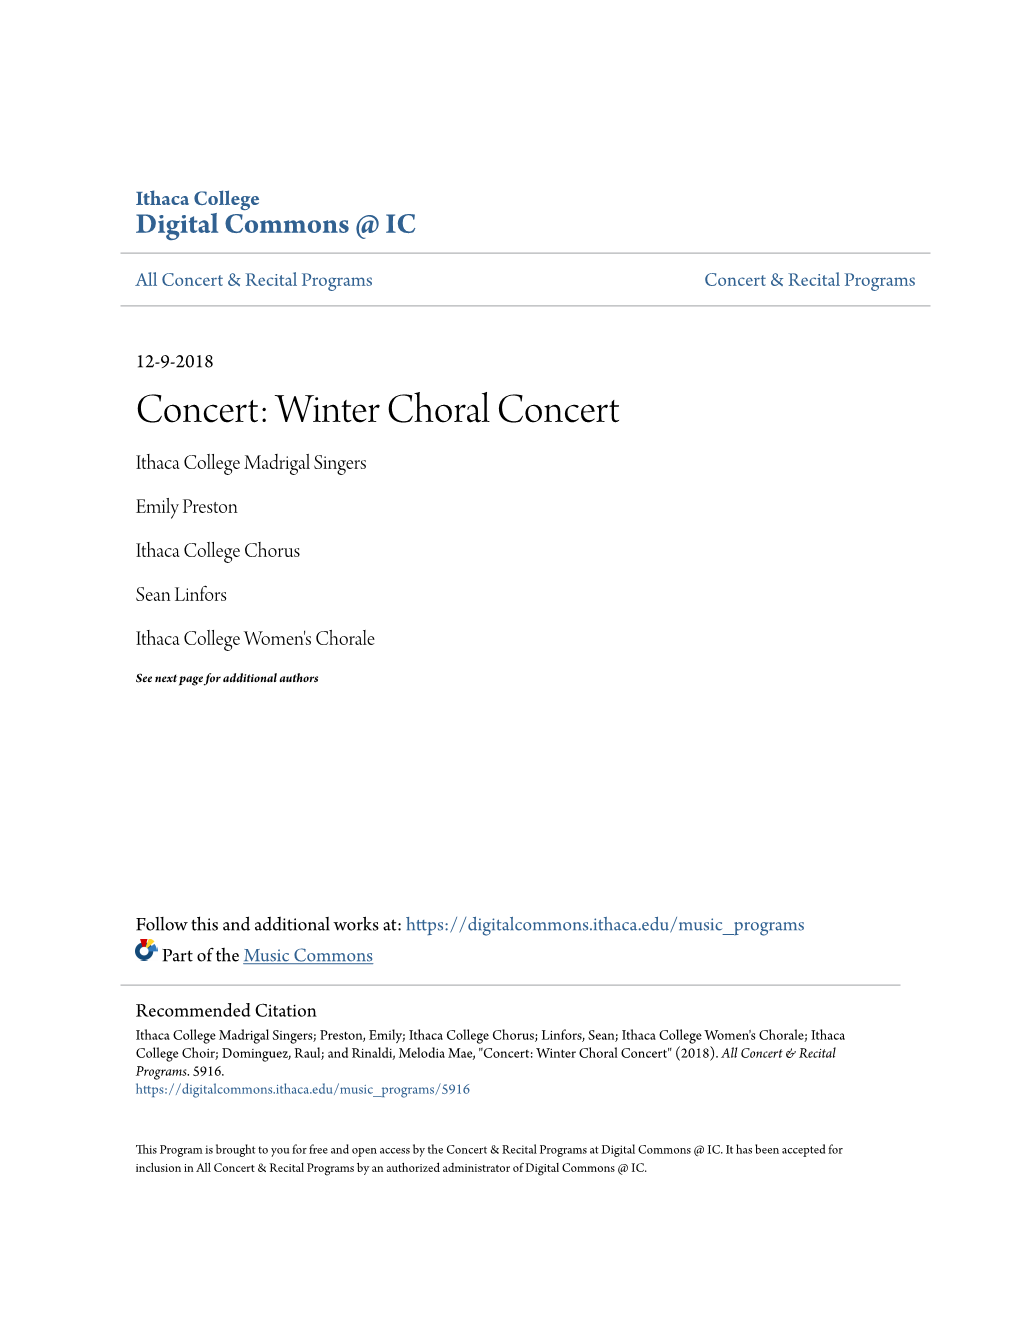 Winter Choral Concert Ithaca College Madrigal Singers